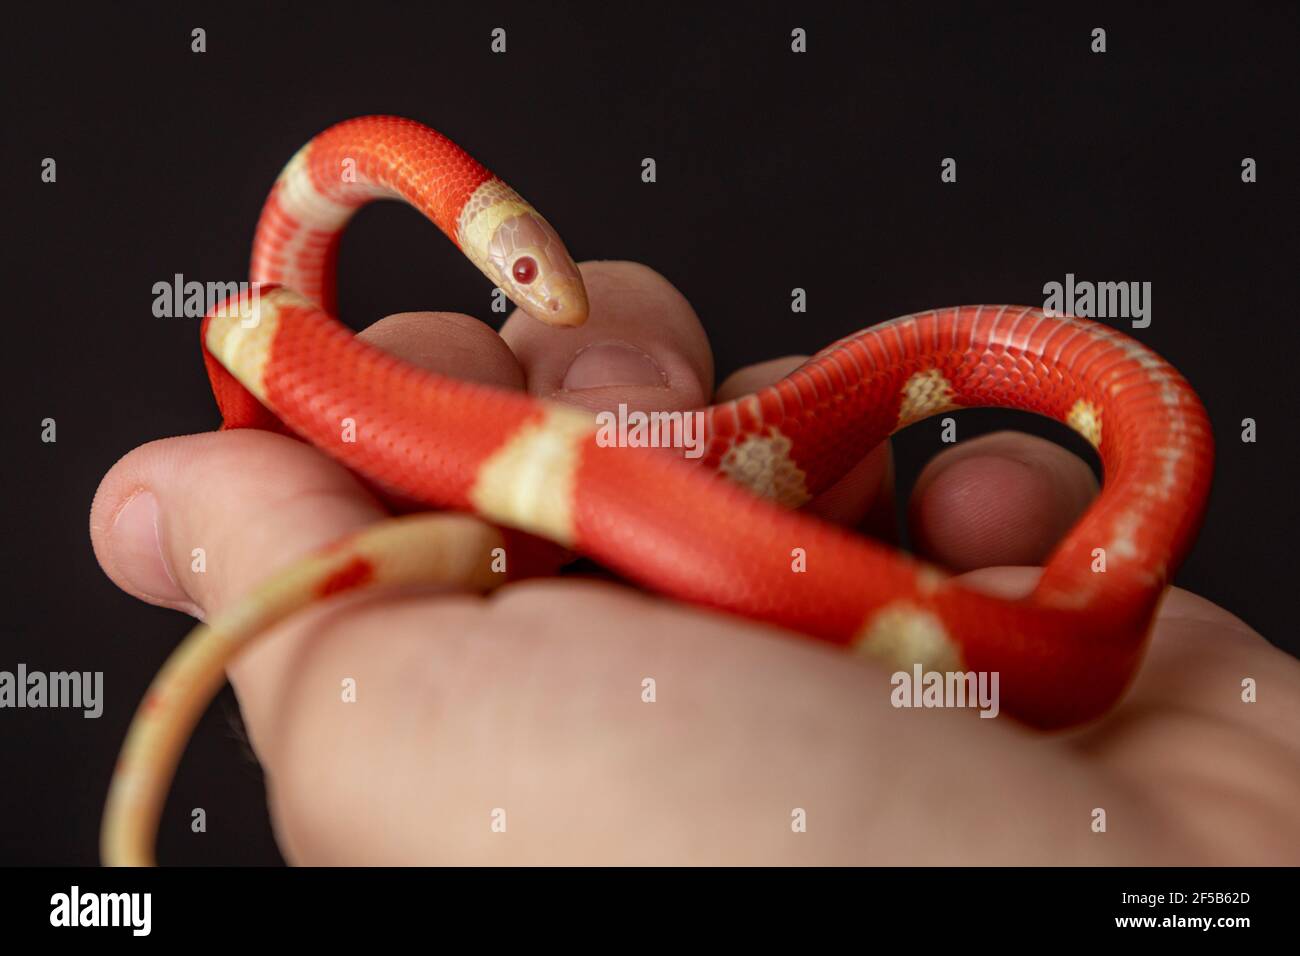 Lampropeltis triangulum, commonly known as the milk snake or milksnake, is a species of kingsnake. Stock Photo